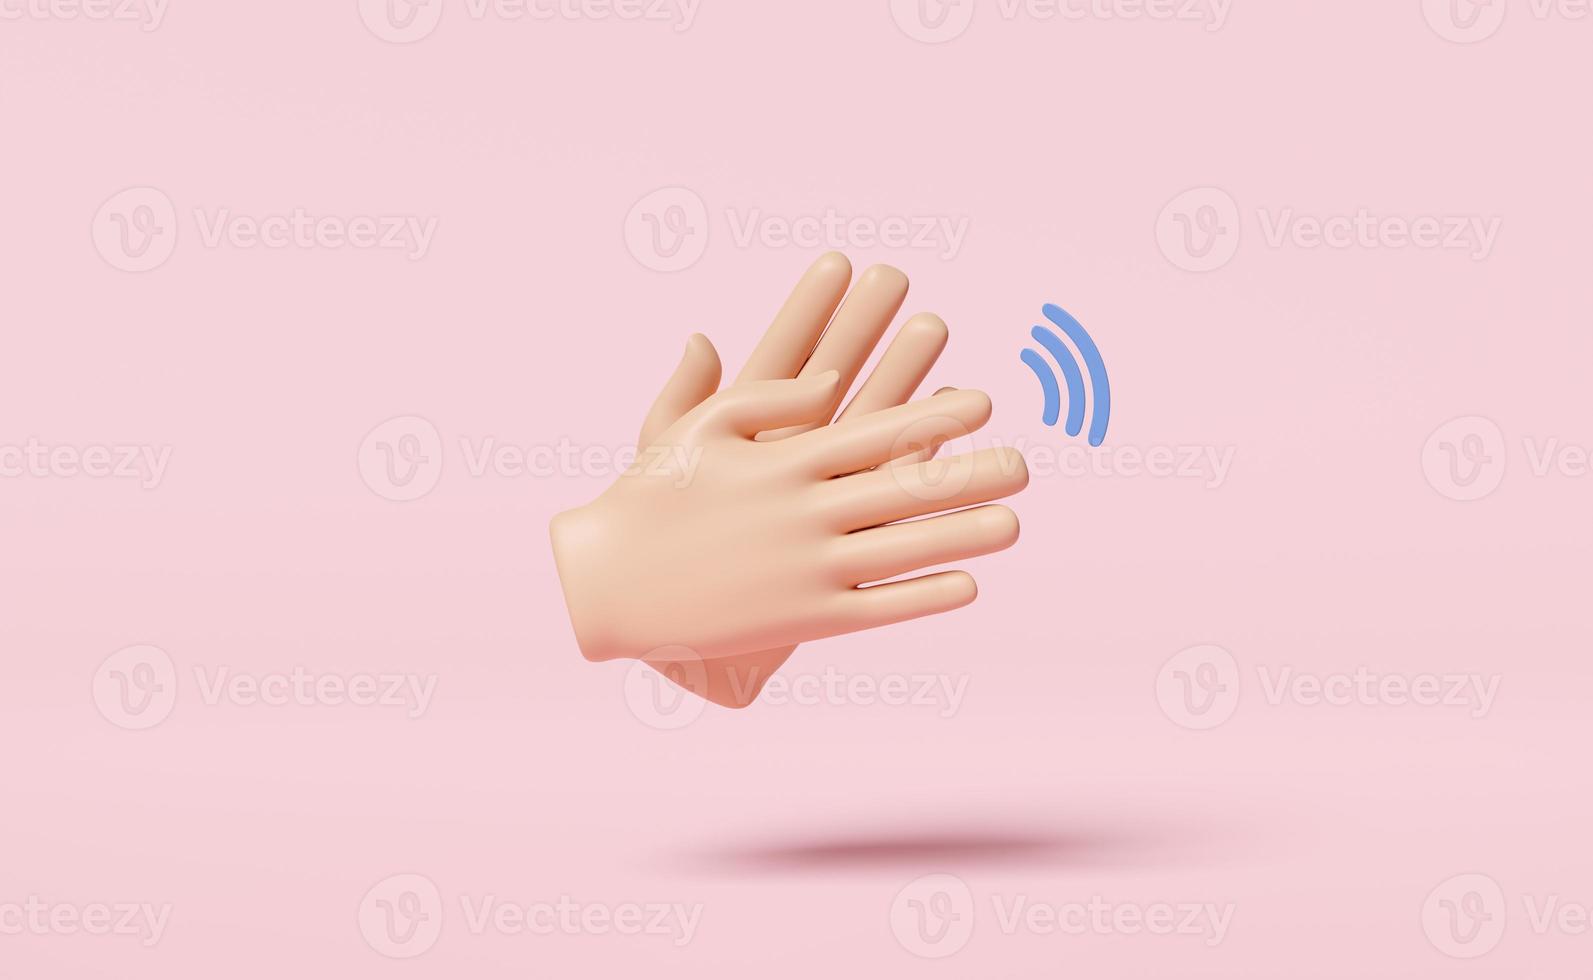 3D clapping hands or hands applauding icon isolated on pink ...